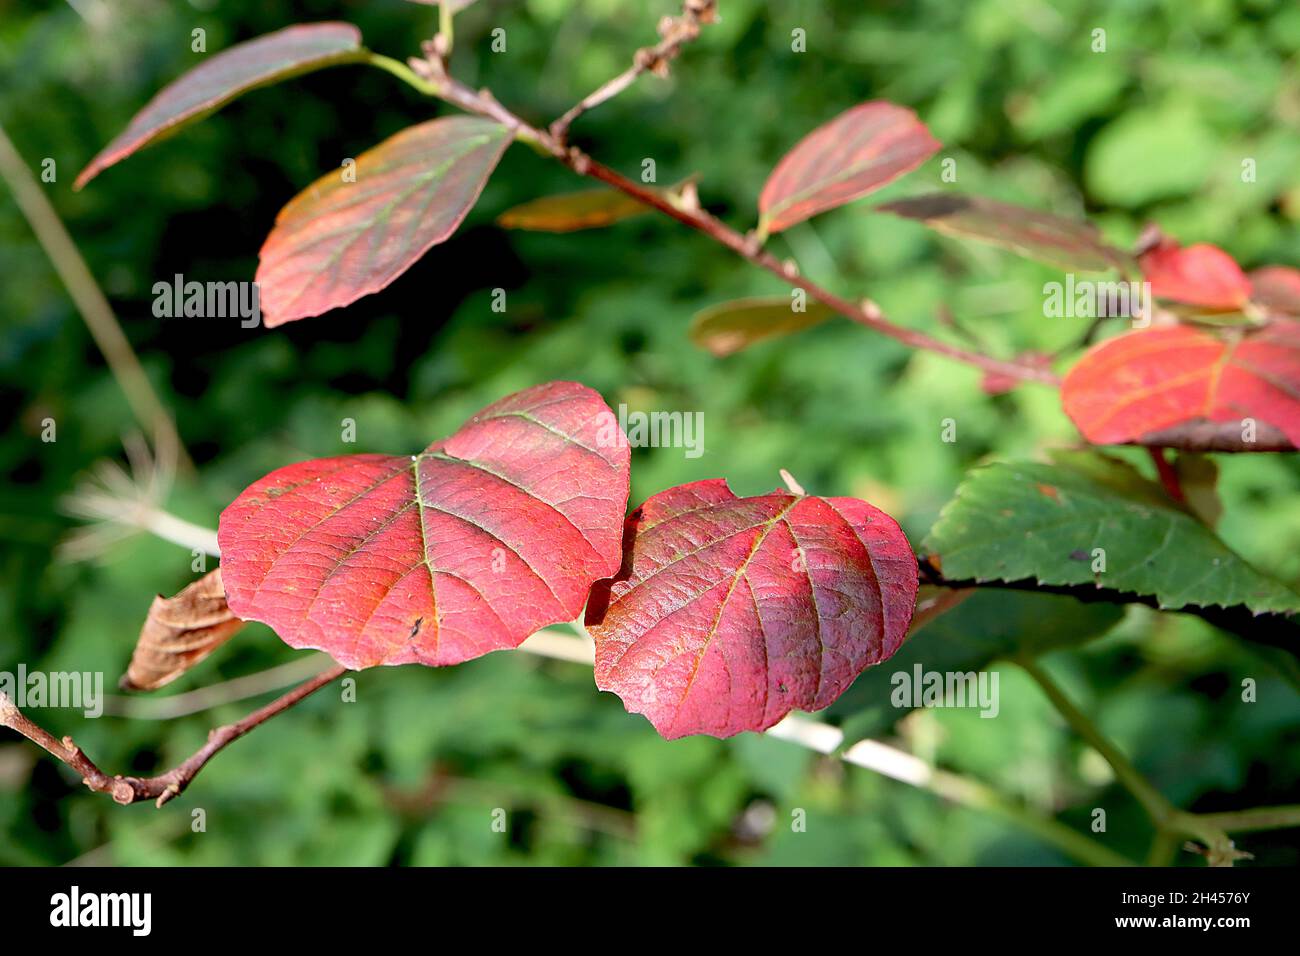 Fothergilla gardenia ‘Blue Mist’ dwarf fothergilla Blue Mist – small mid green and red leaves with notched margins,  October, England, UK Stock Photo